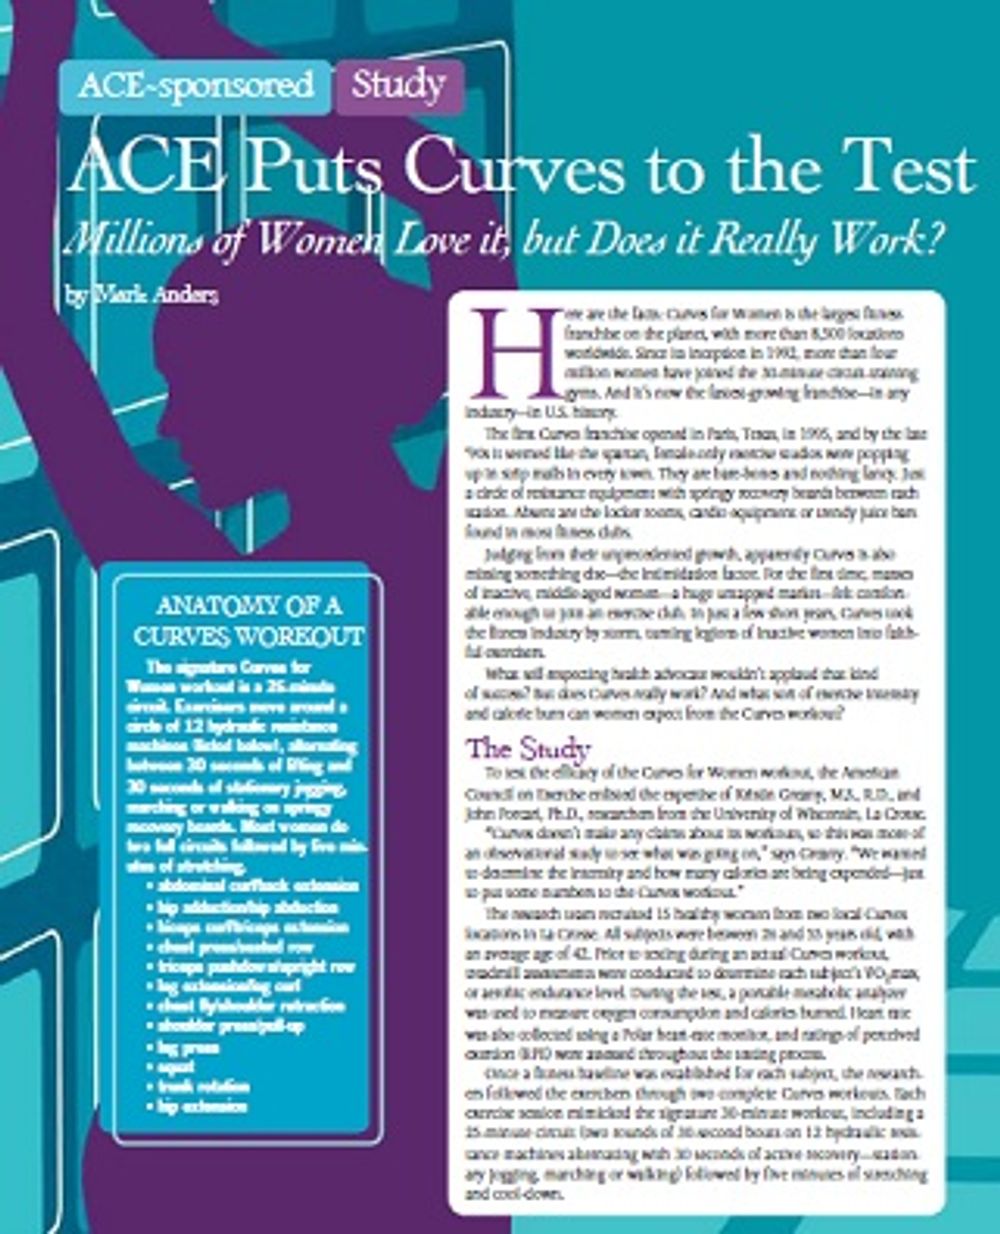 ACE Puts Curves to the Test